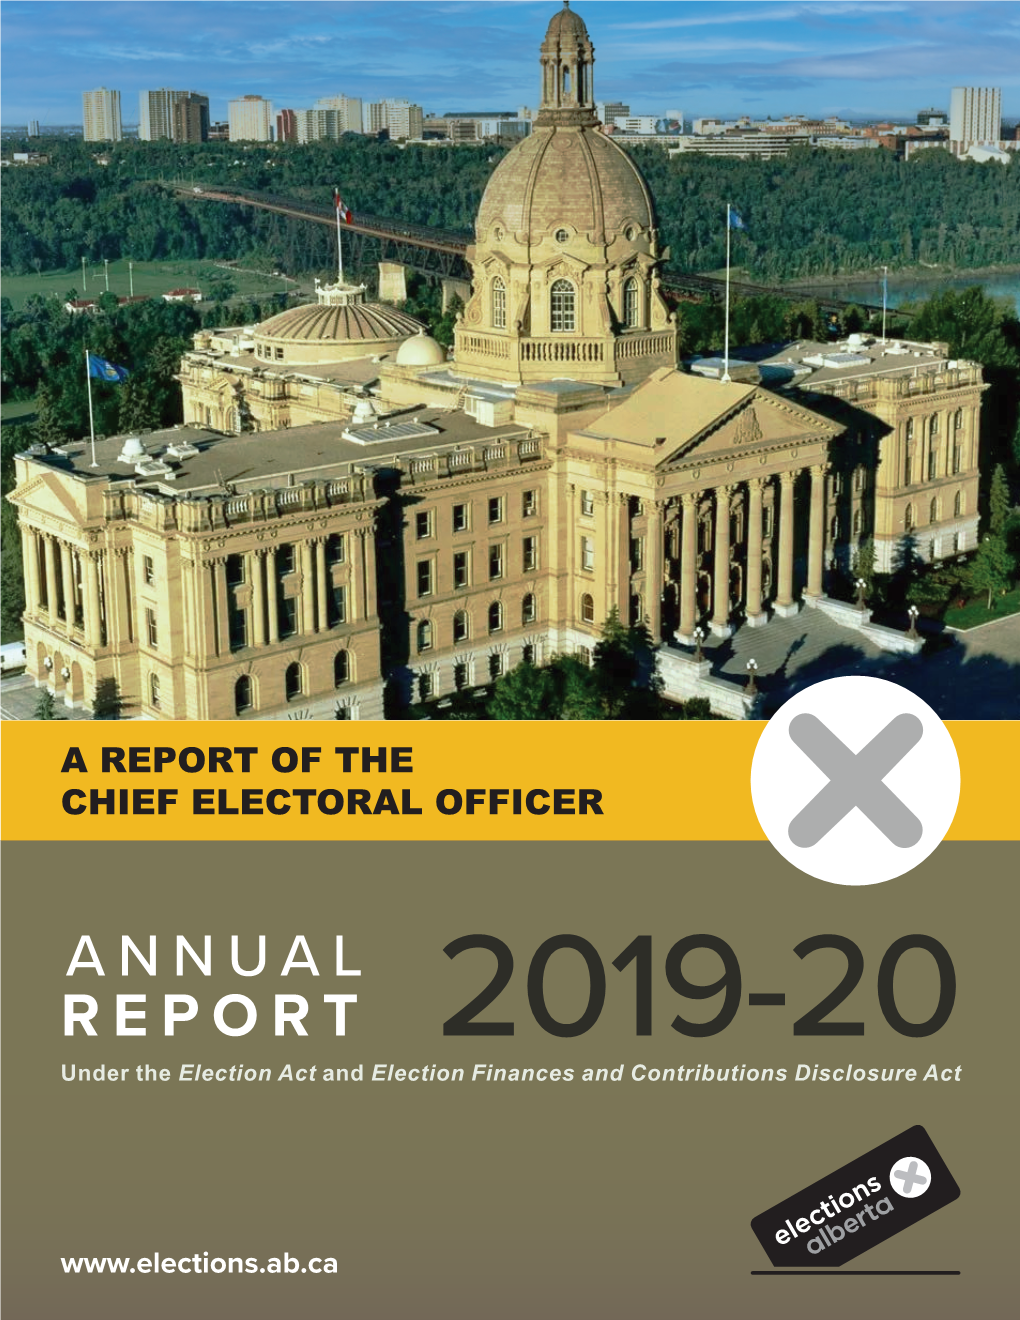 2019-20 Annual Report of the Chief Electoral Officer of Alberta